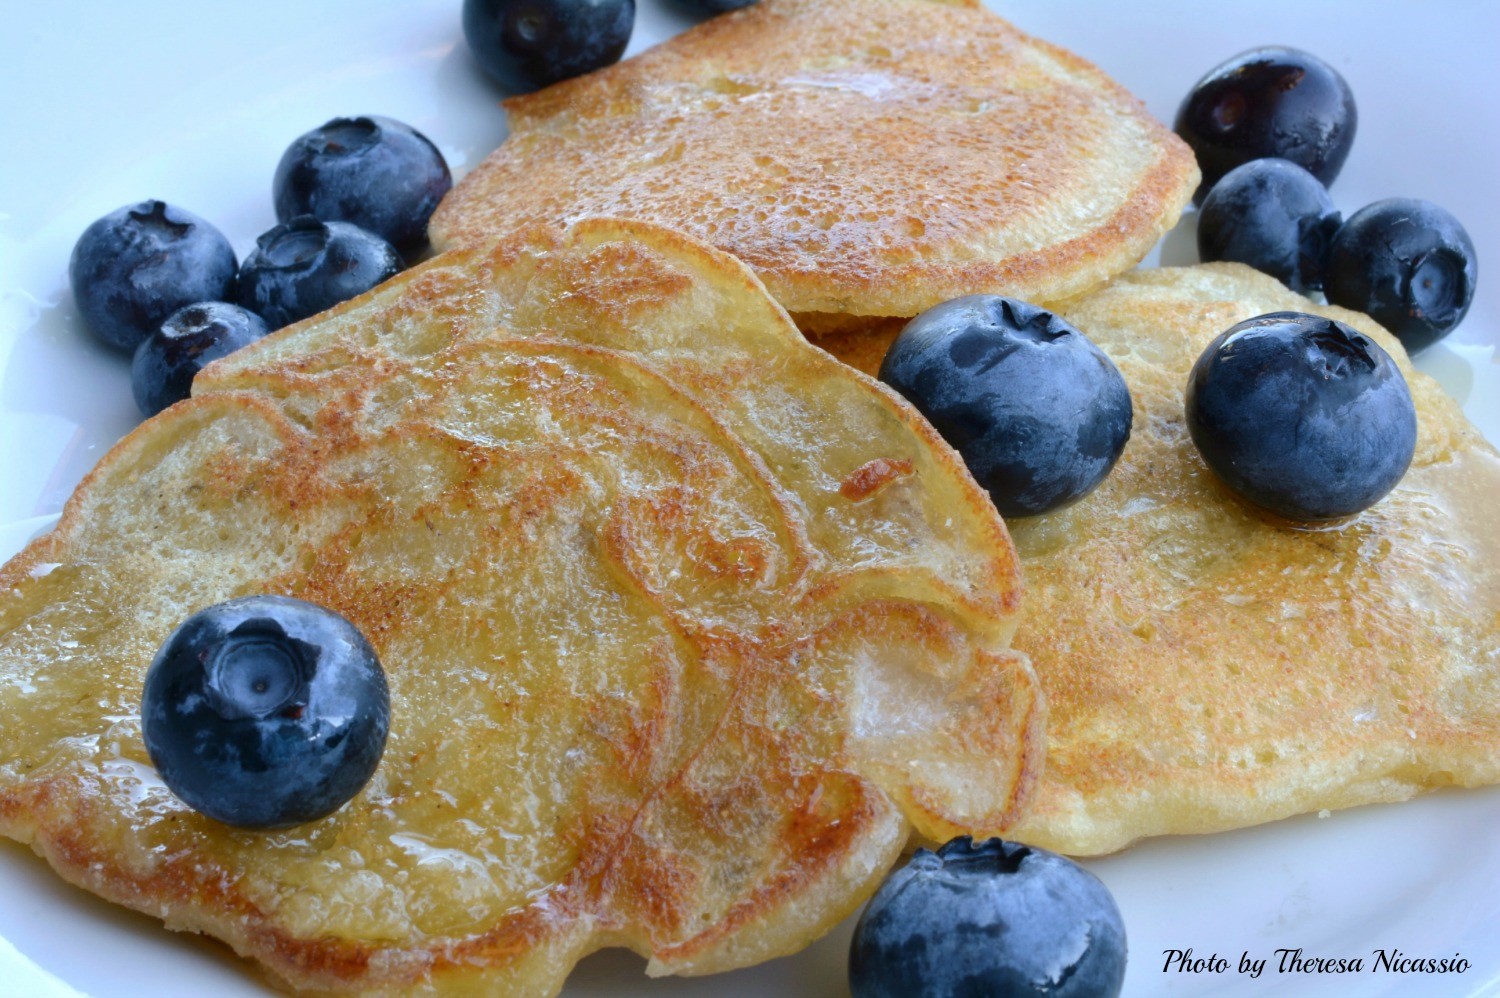 Fluffy & Delicious...as pancakes are meanth to be!